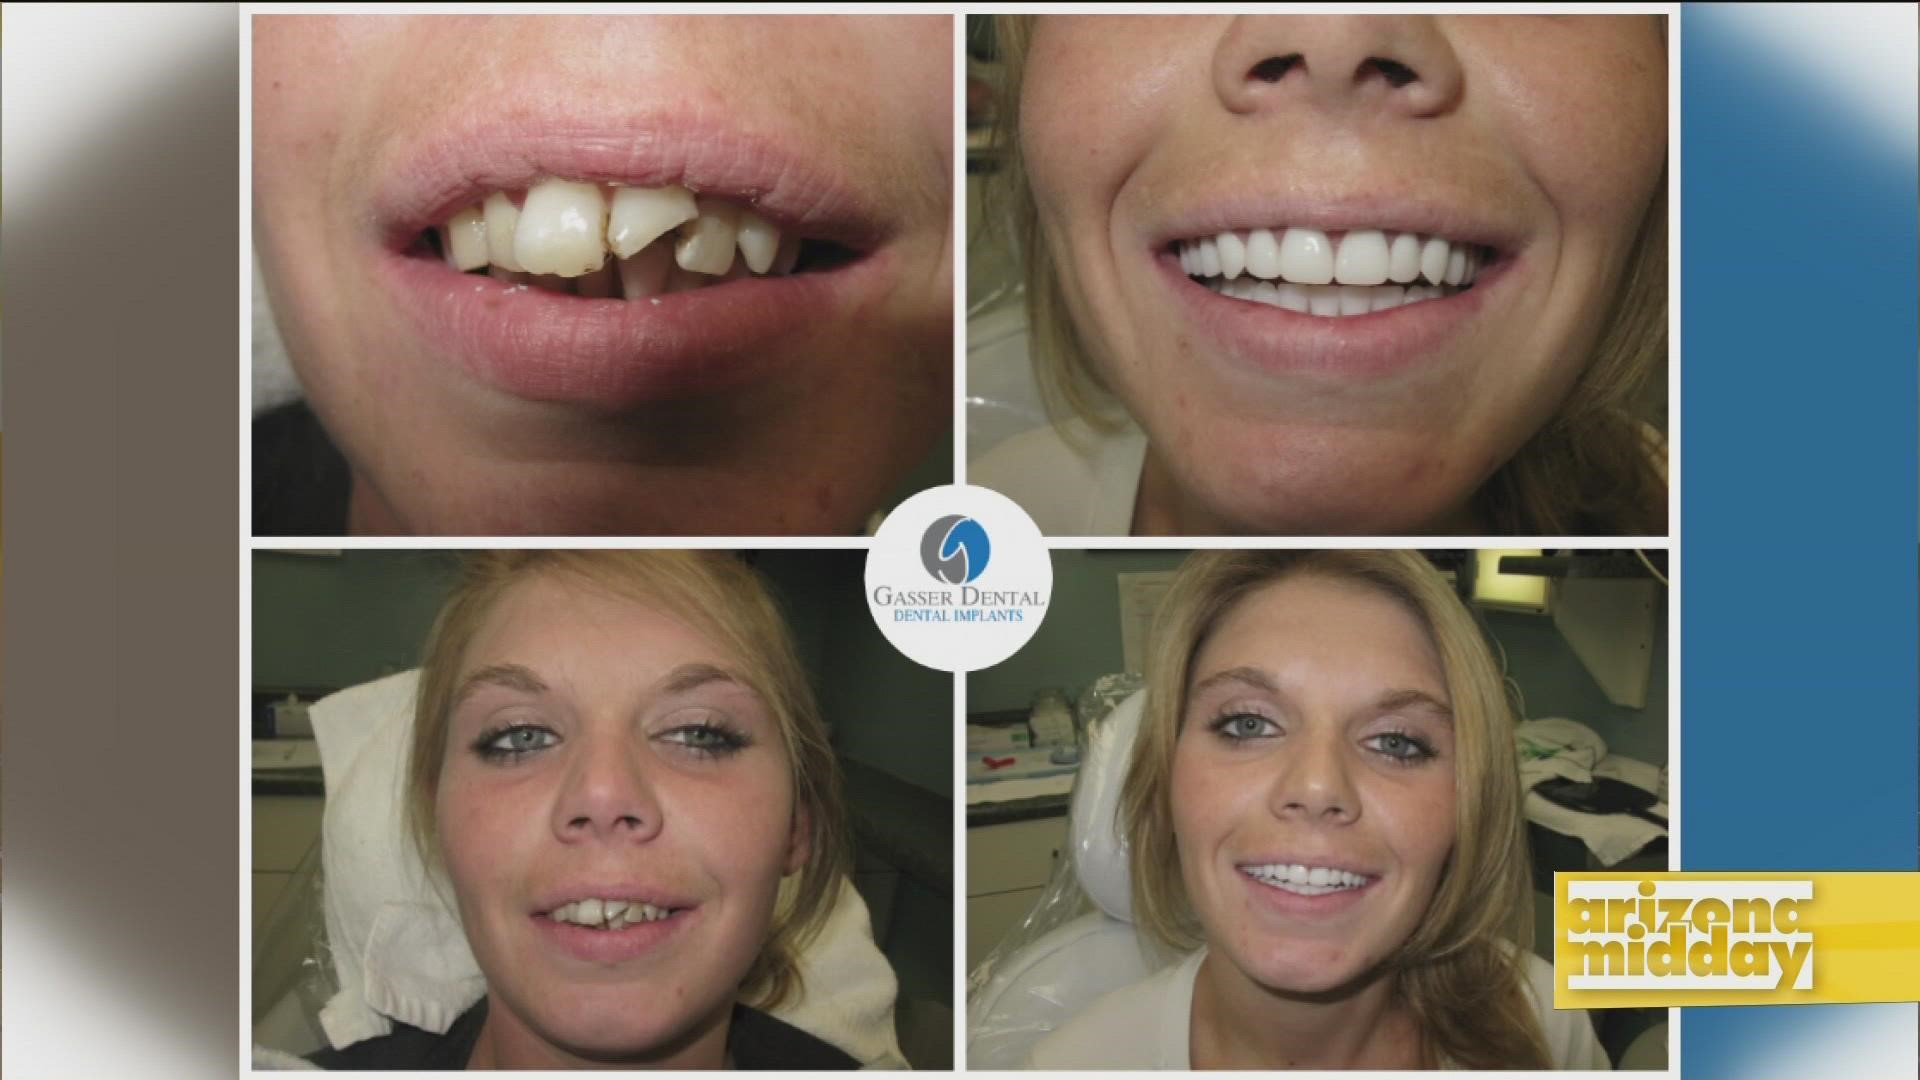 Dr. Gasser shares how he can change a smile overnight with advanced dental technology.